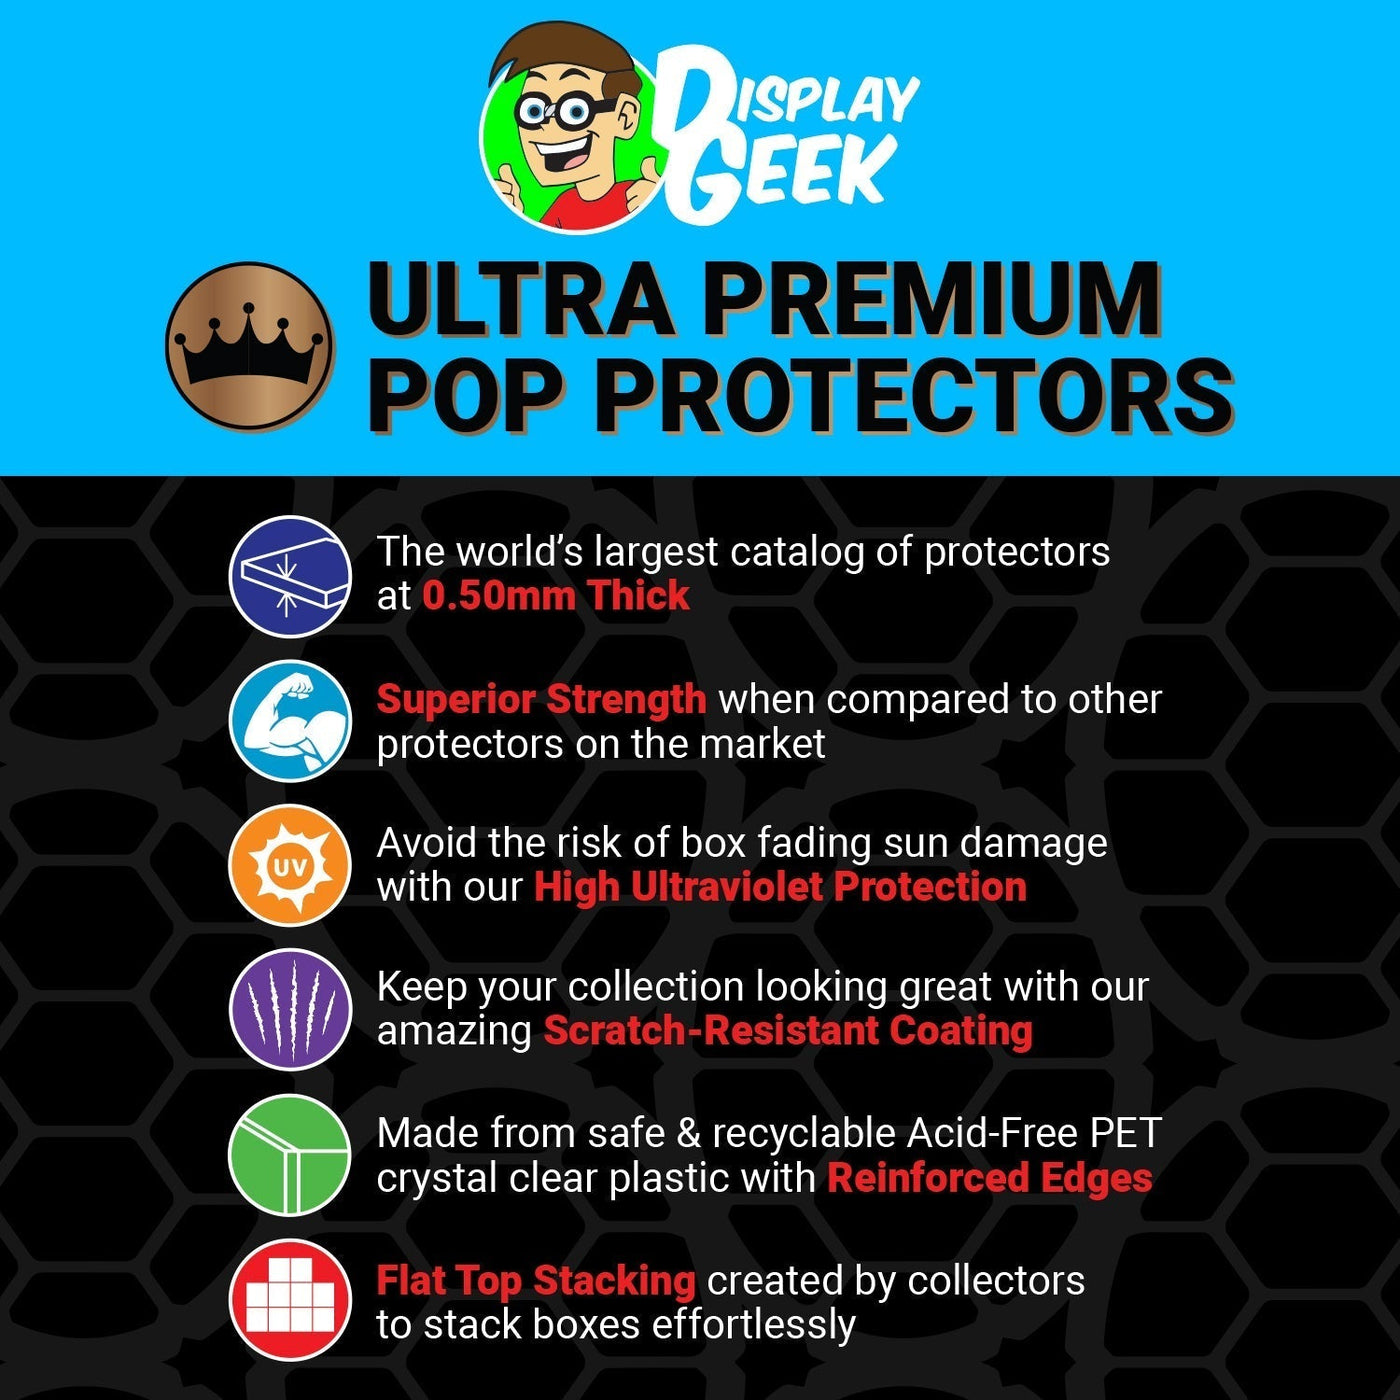 Pop Protector for 2 Pack Tourist Dave & Tourist Jerry Funko Pop on The Protector Guide App by Display Geek